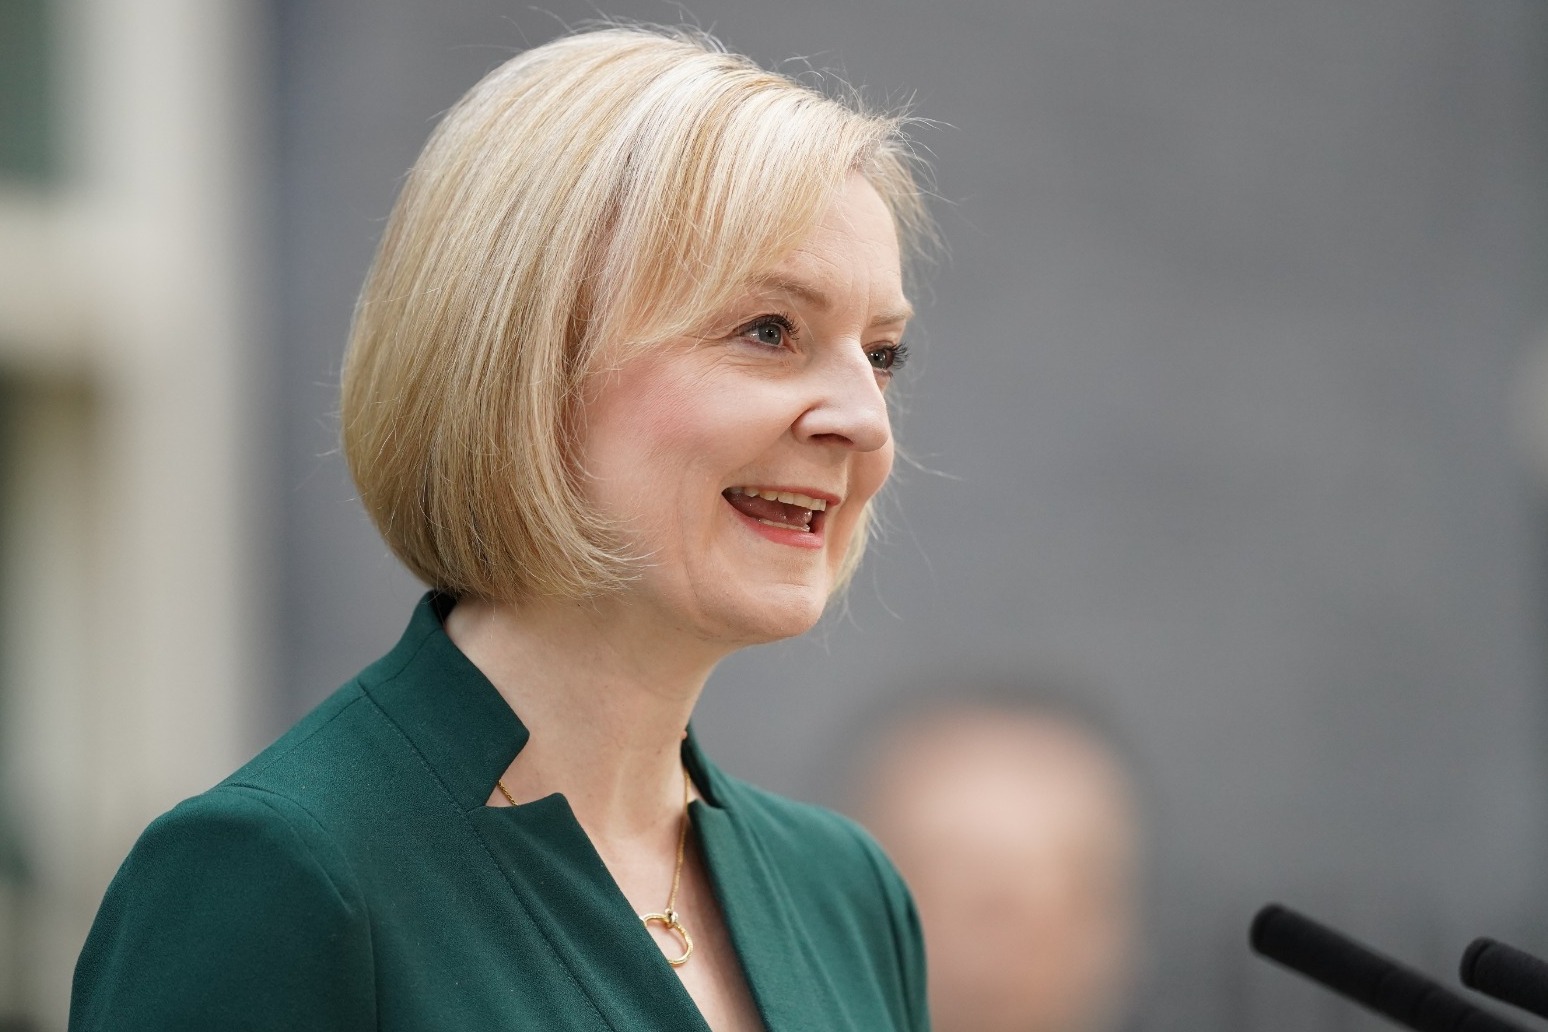 Government urged to investigate reports of Liz Truss phone hacking 